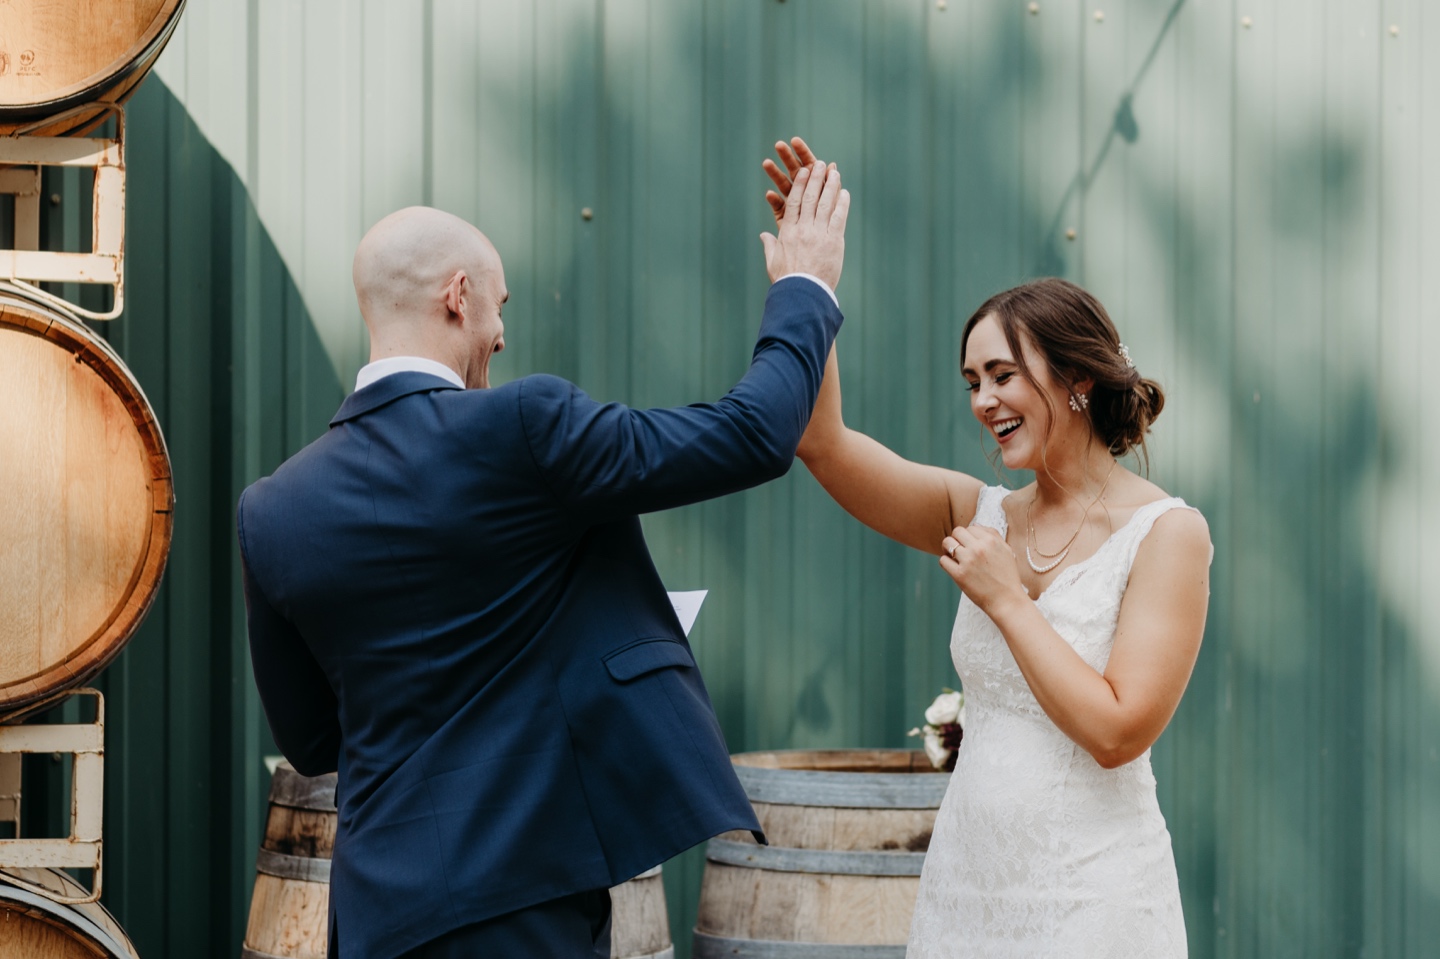 Bride and groom high five after reading their wedding letters to each other. Wedding photography in Sacramento by Liz Koston.